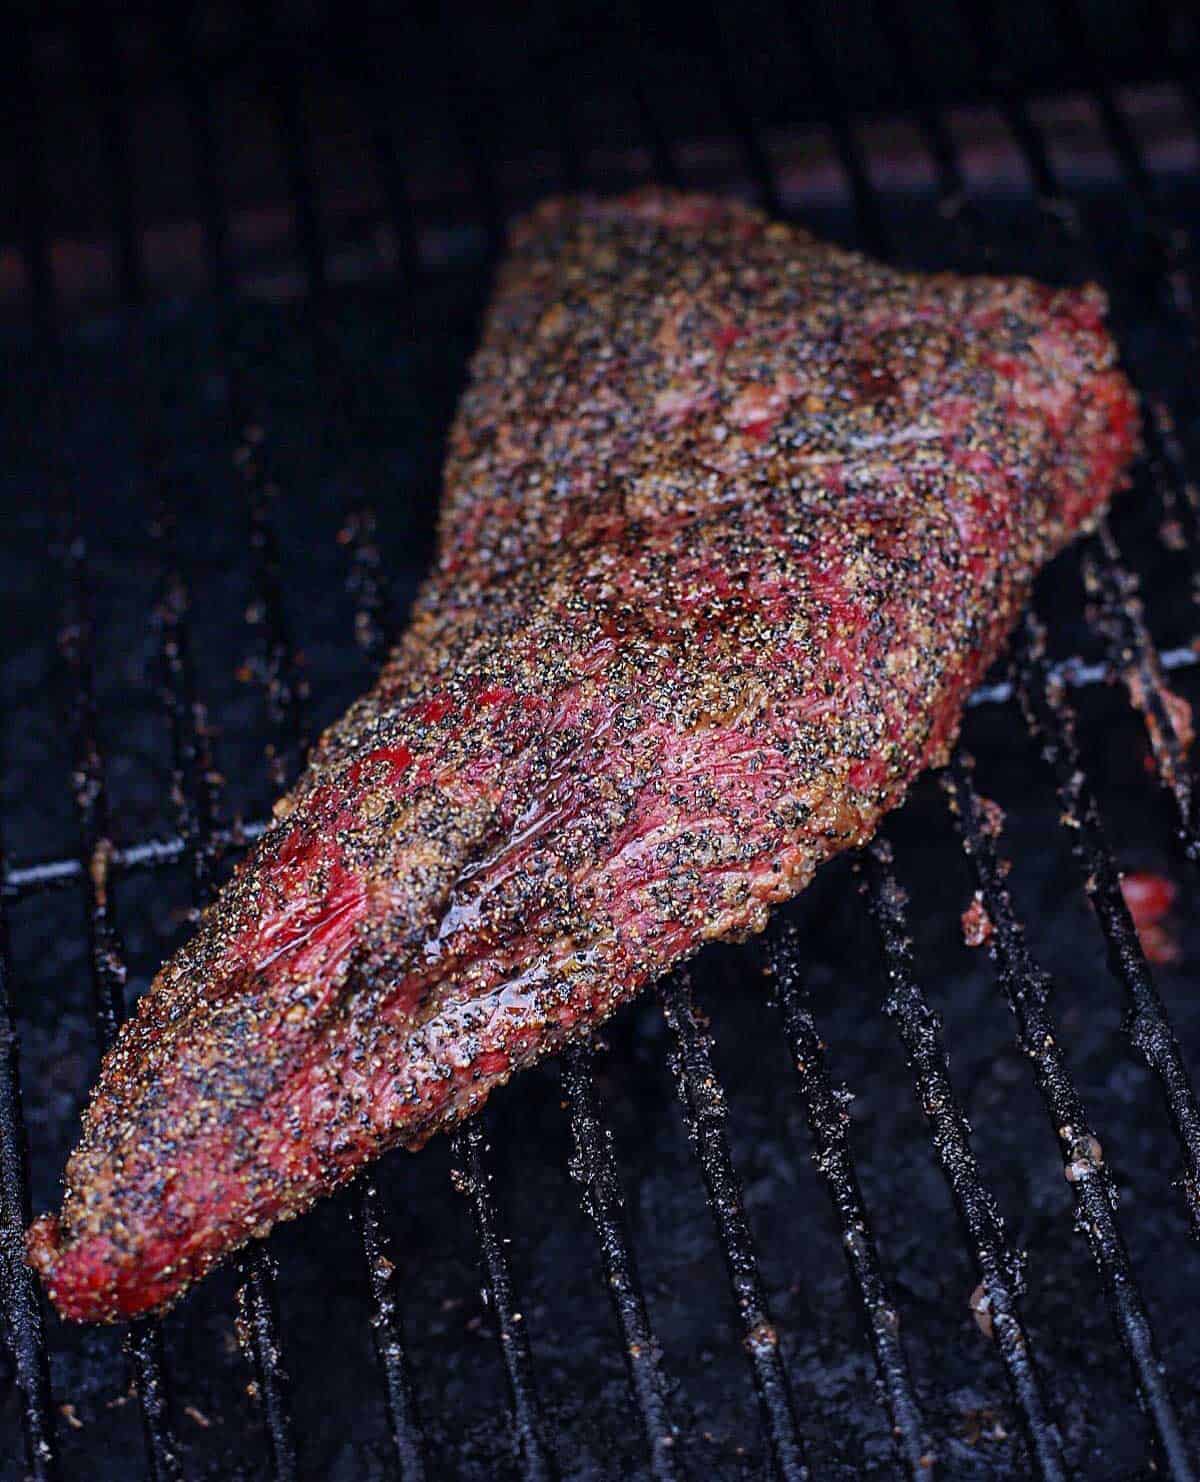 Smoked tri tip on a grill.